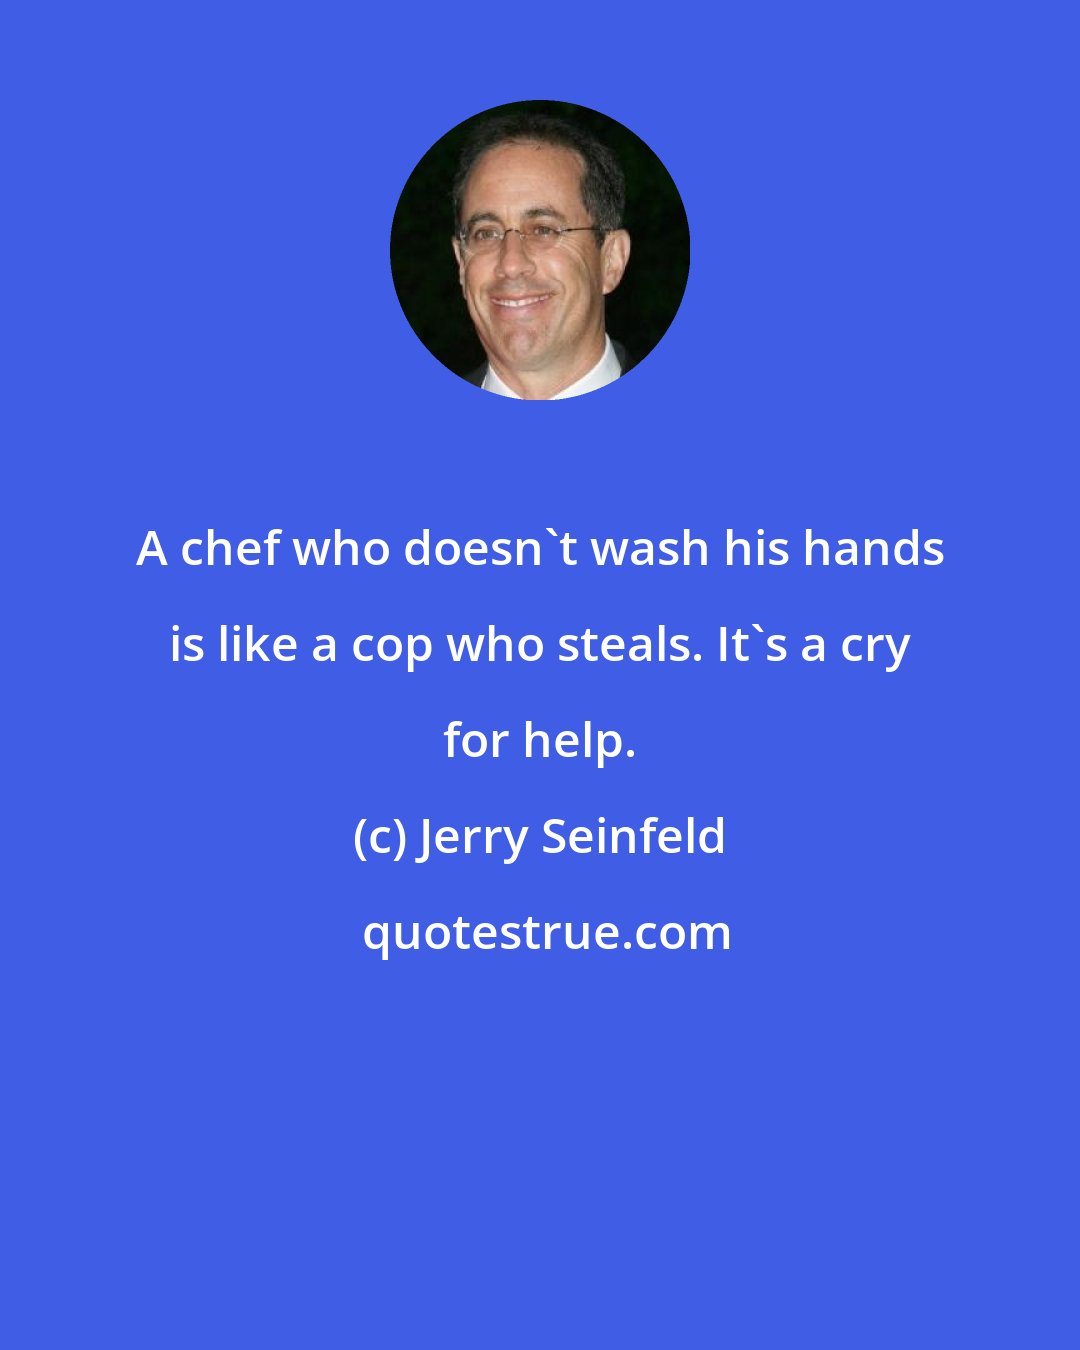 Jerry Seinfeld: A chef who doesn't wash his hands is like a cop who steals. It's a cry for help.